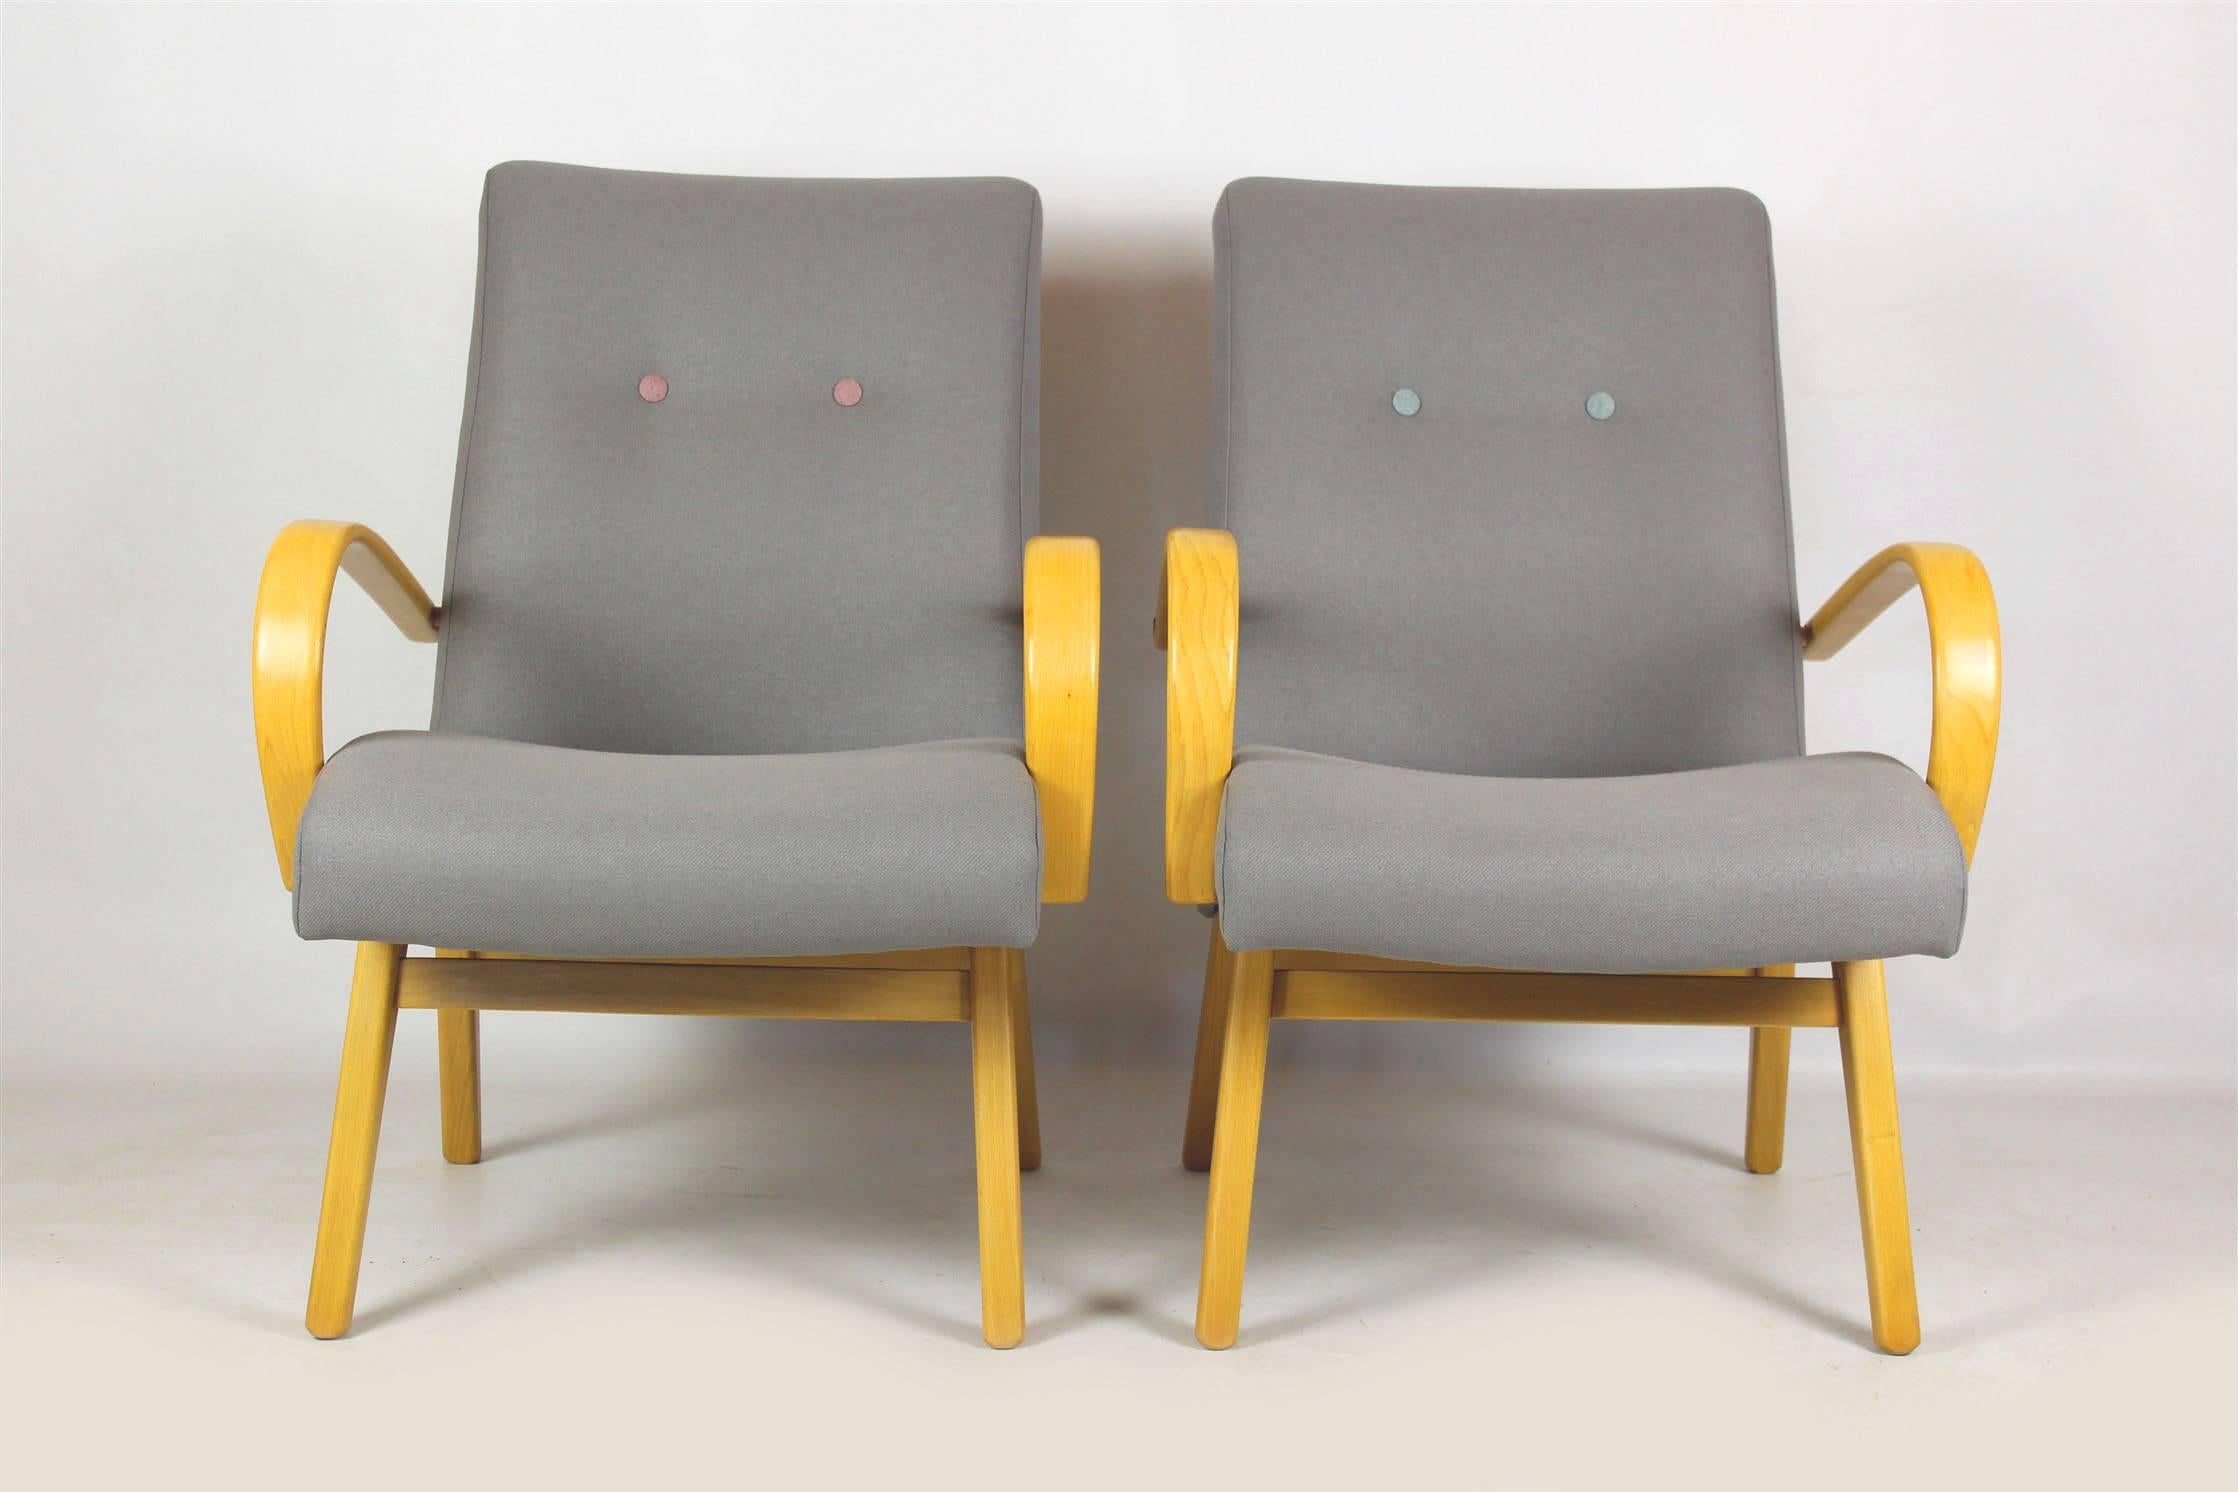 This pair of armchairs are from the mid-1960s and were made in former Czechoslovakia. The armrests are made out of beech bentwood.
Completely restored, satin lacquered woodwork, upholstered in grey and pastels fabric.